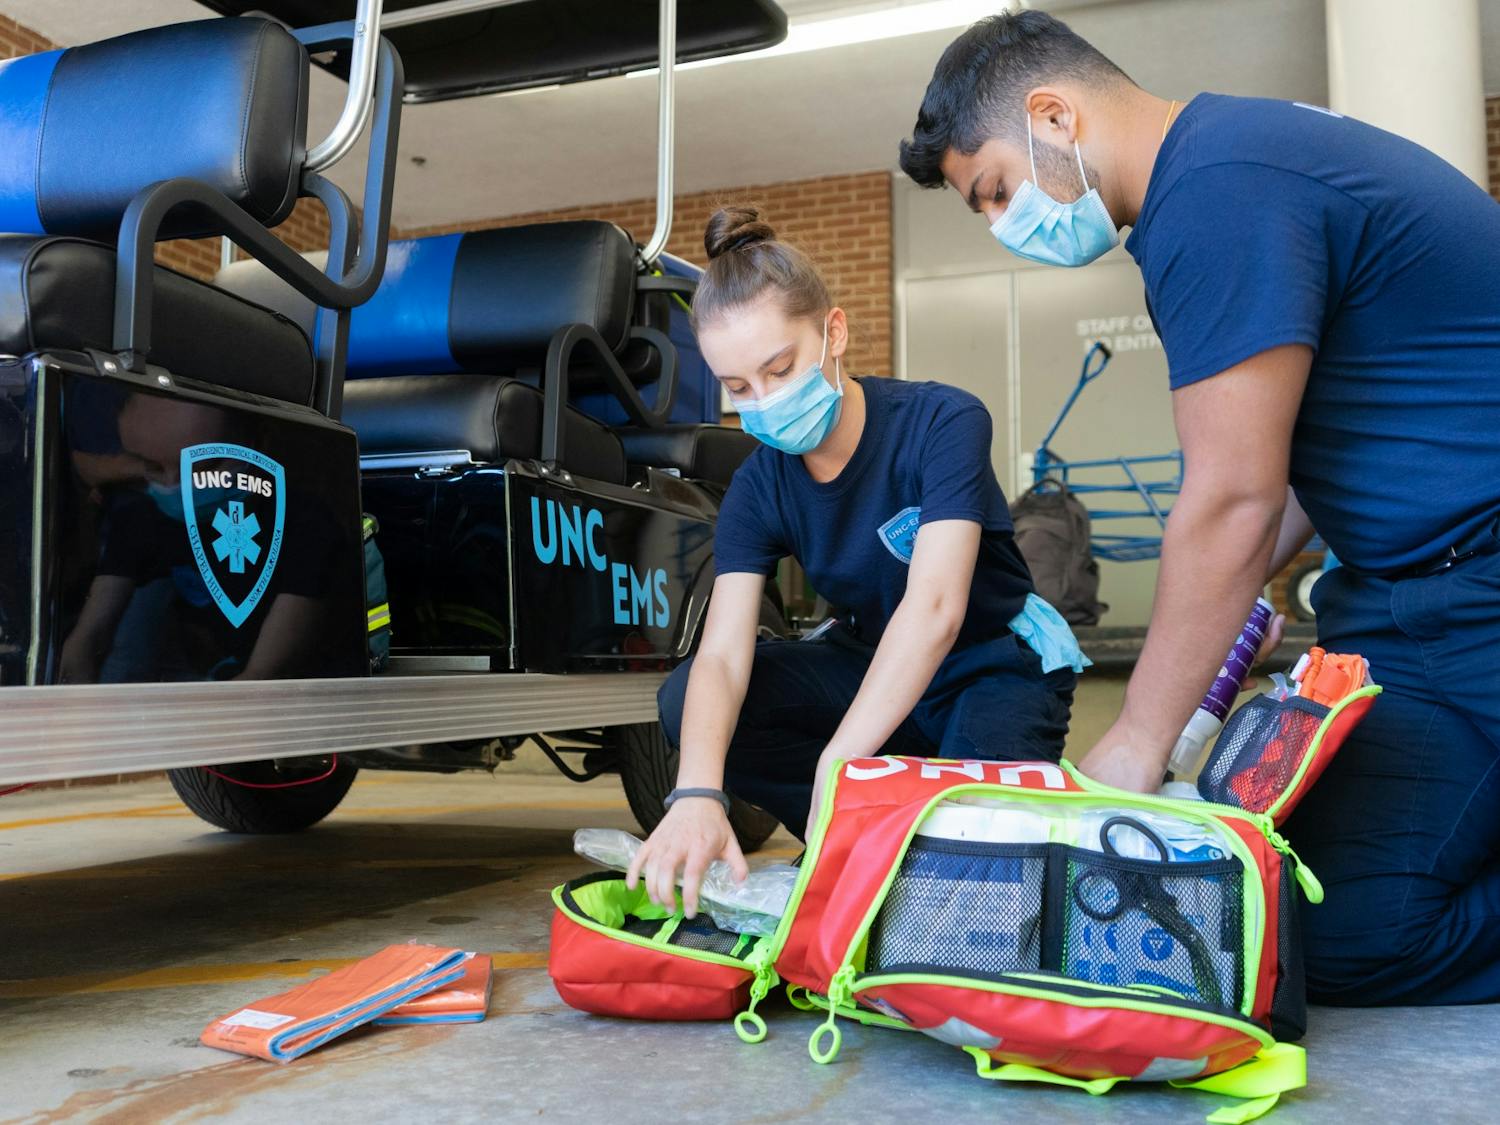 UNC Senior Ishan Khosla and Junior Sarah Torzone show what is kept in their emergency kit on Wednesday, Oct. 20, 2021.